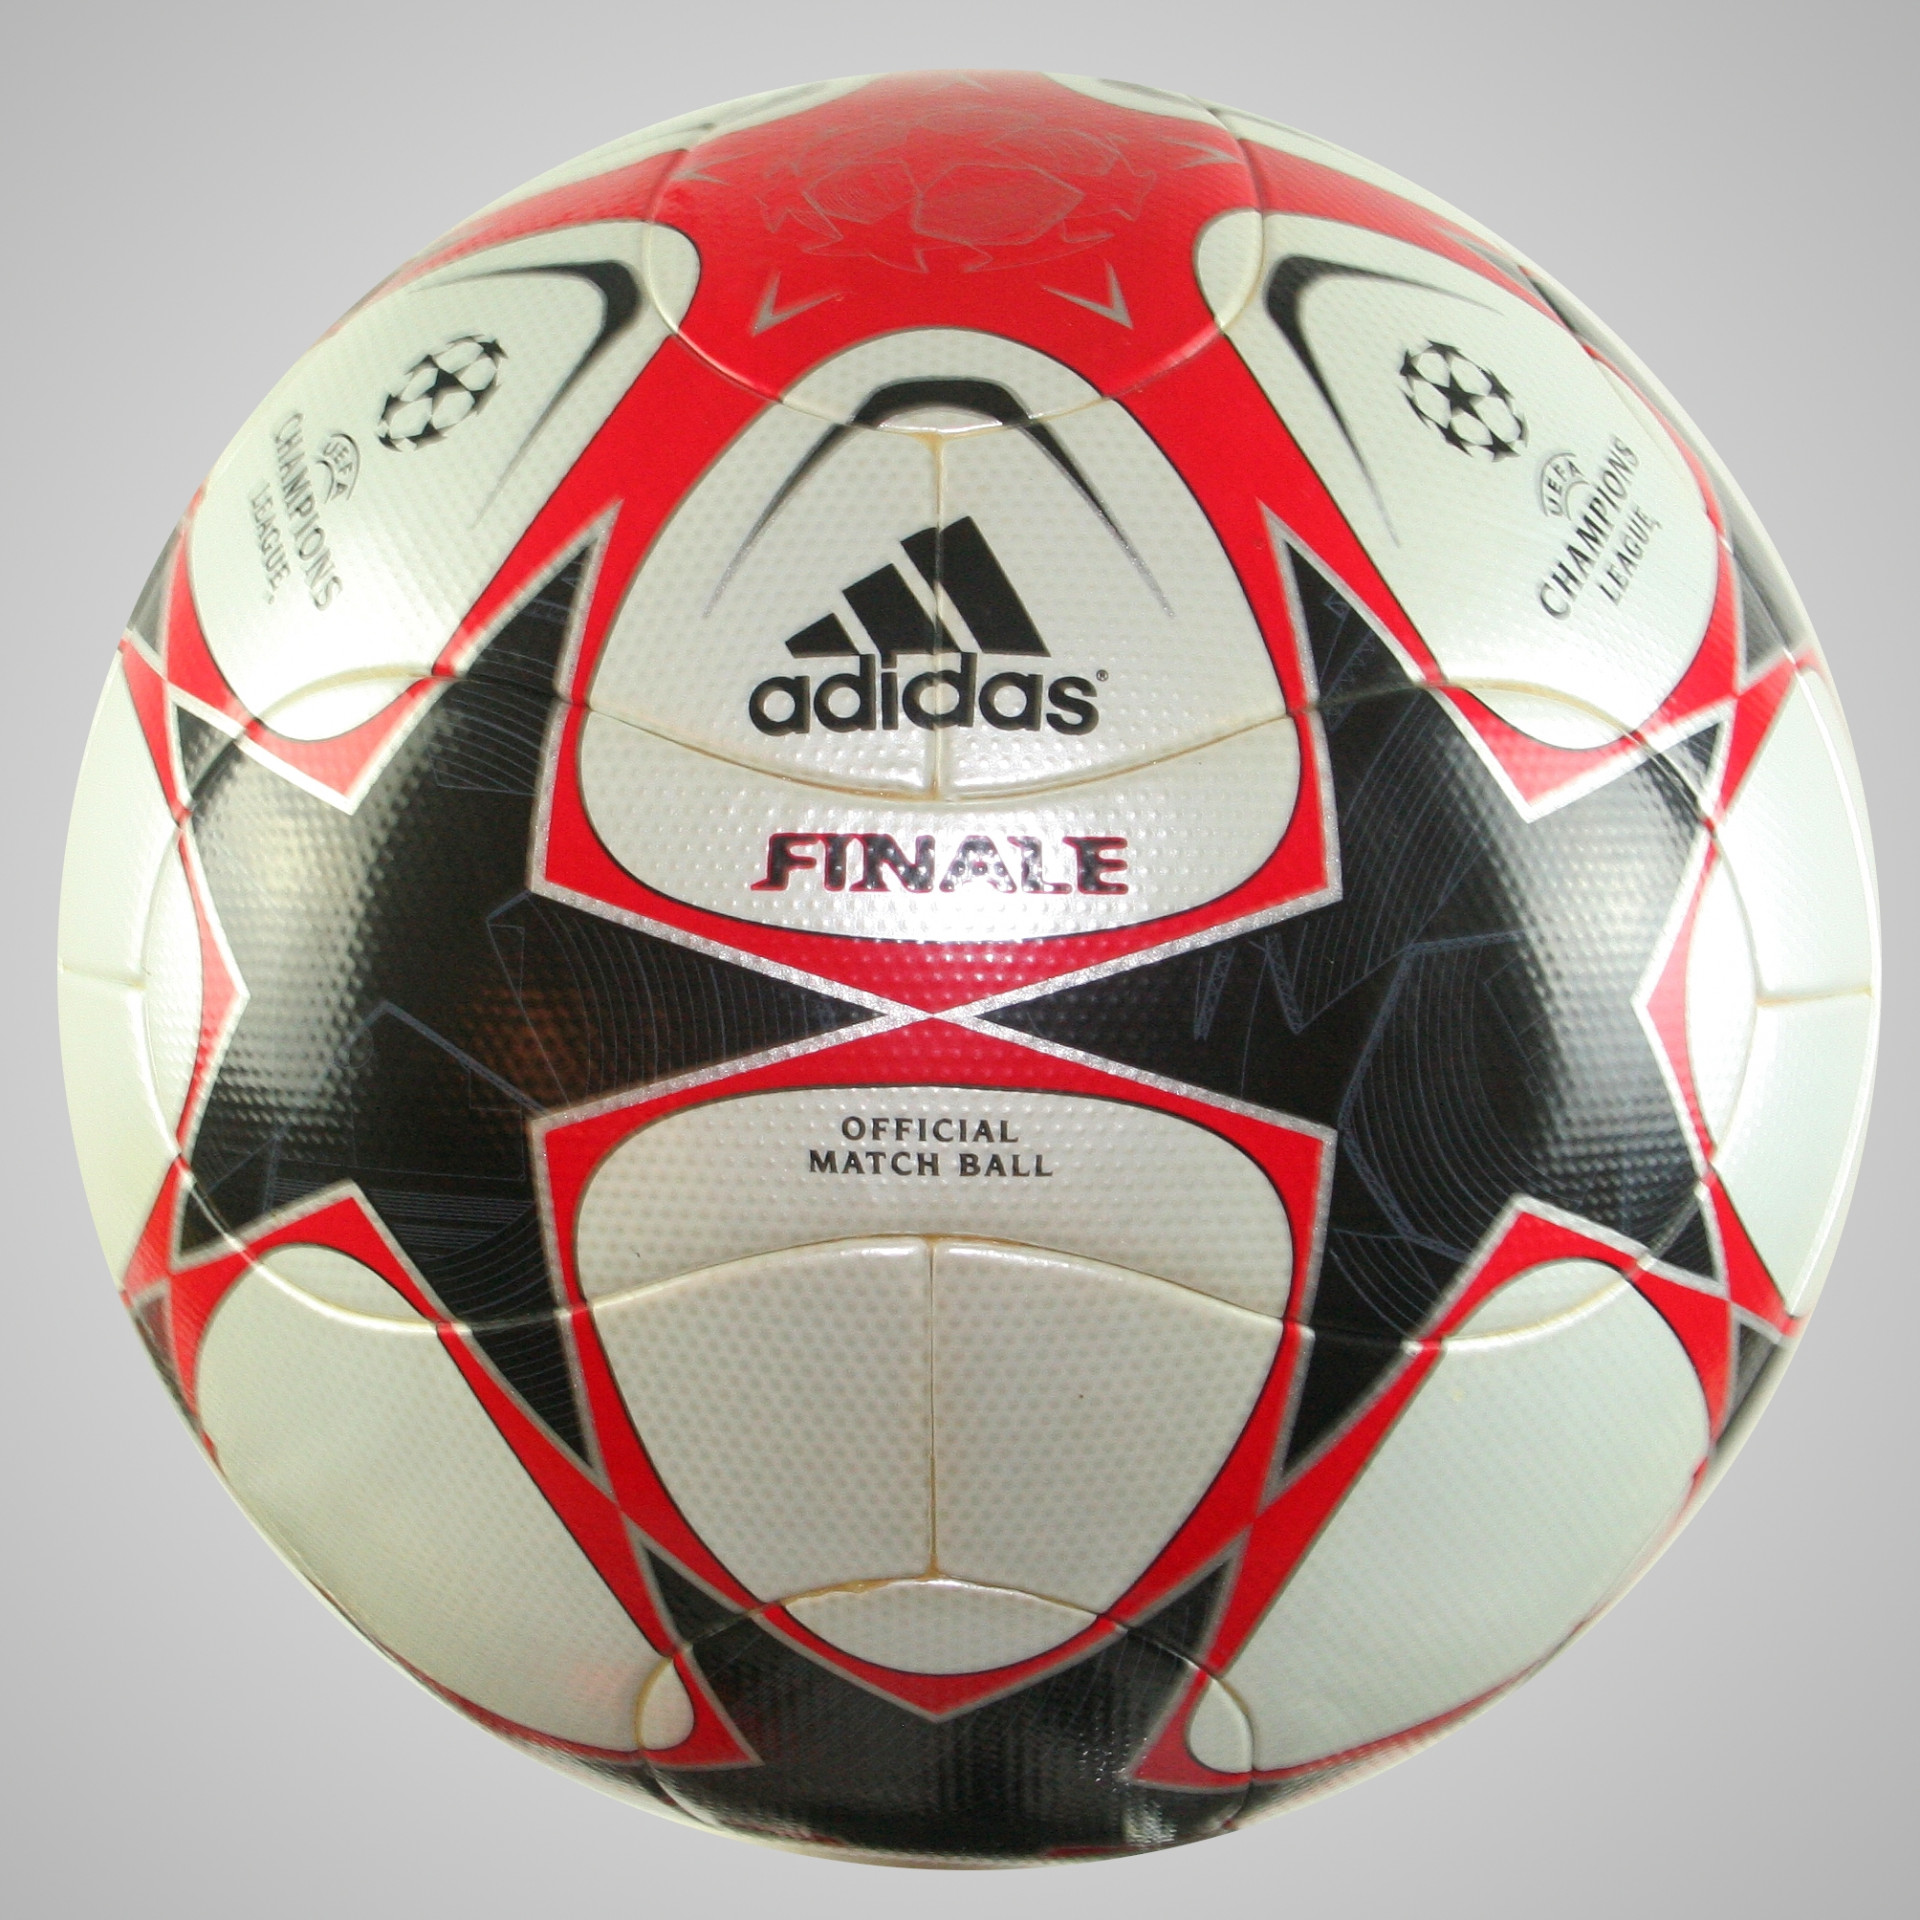 Adidas Finale 2008 Champions League Official Matchball